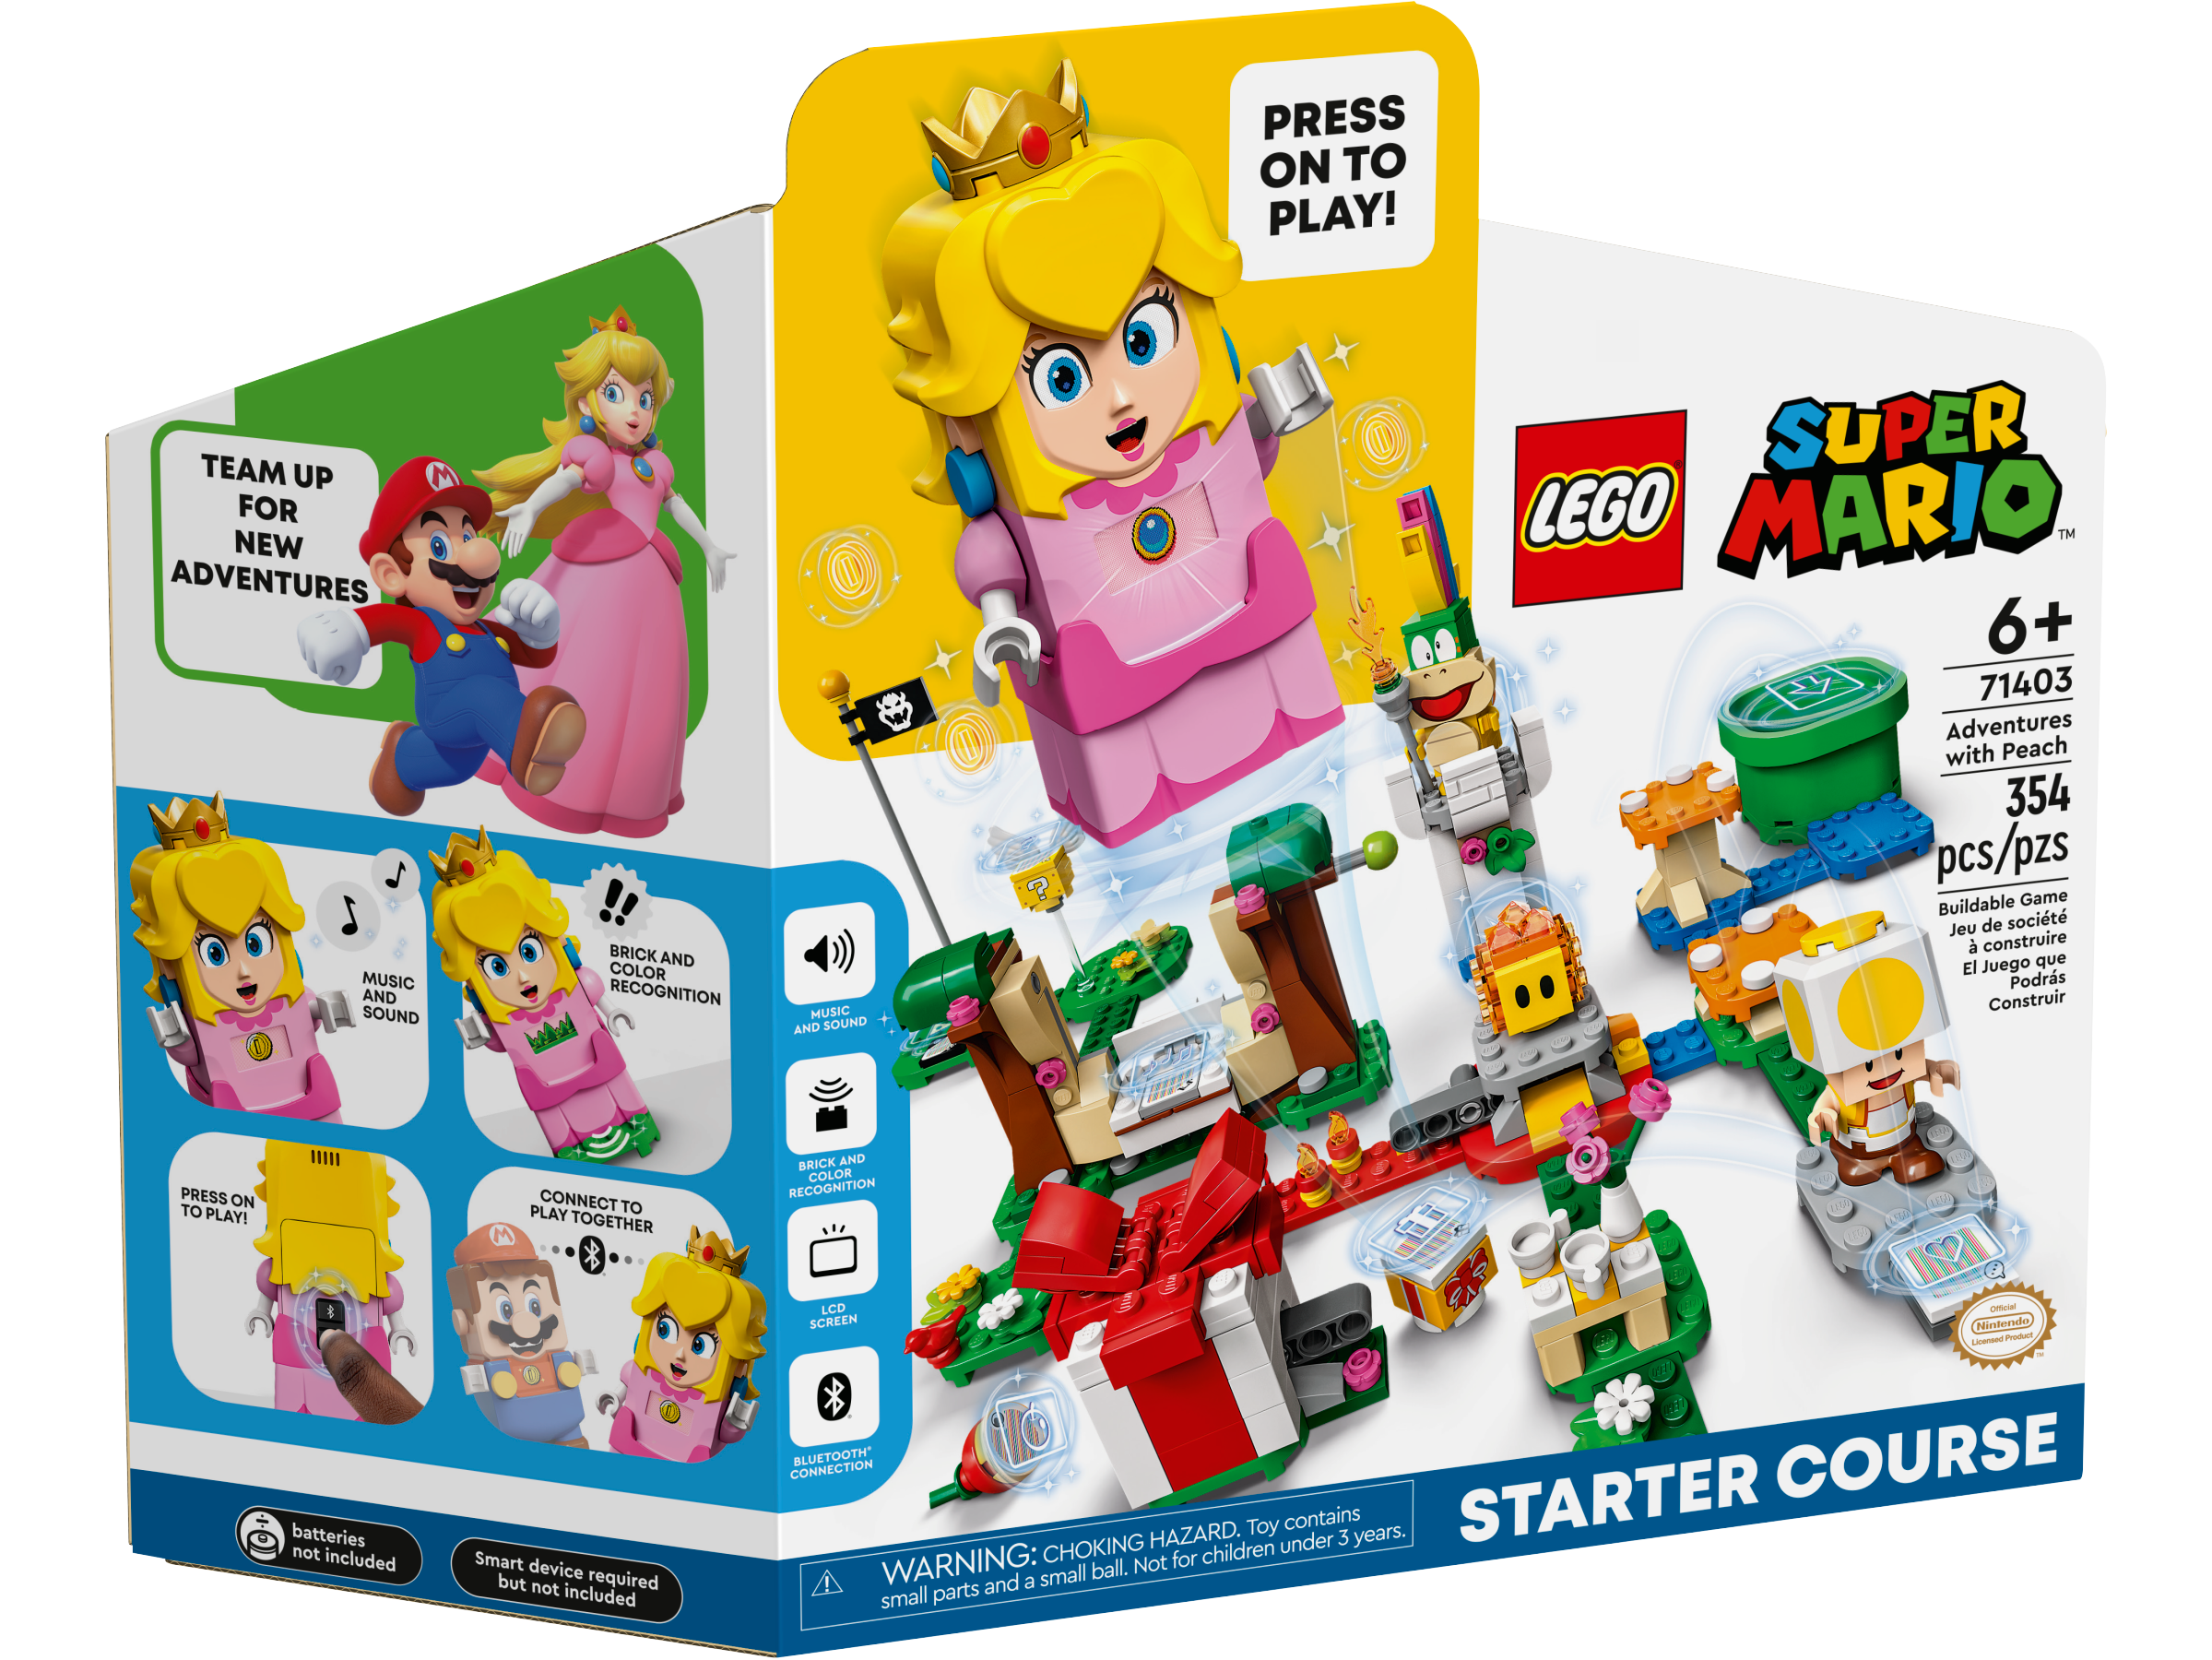 Adventures with Peach Starter Course 71403